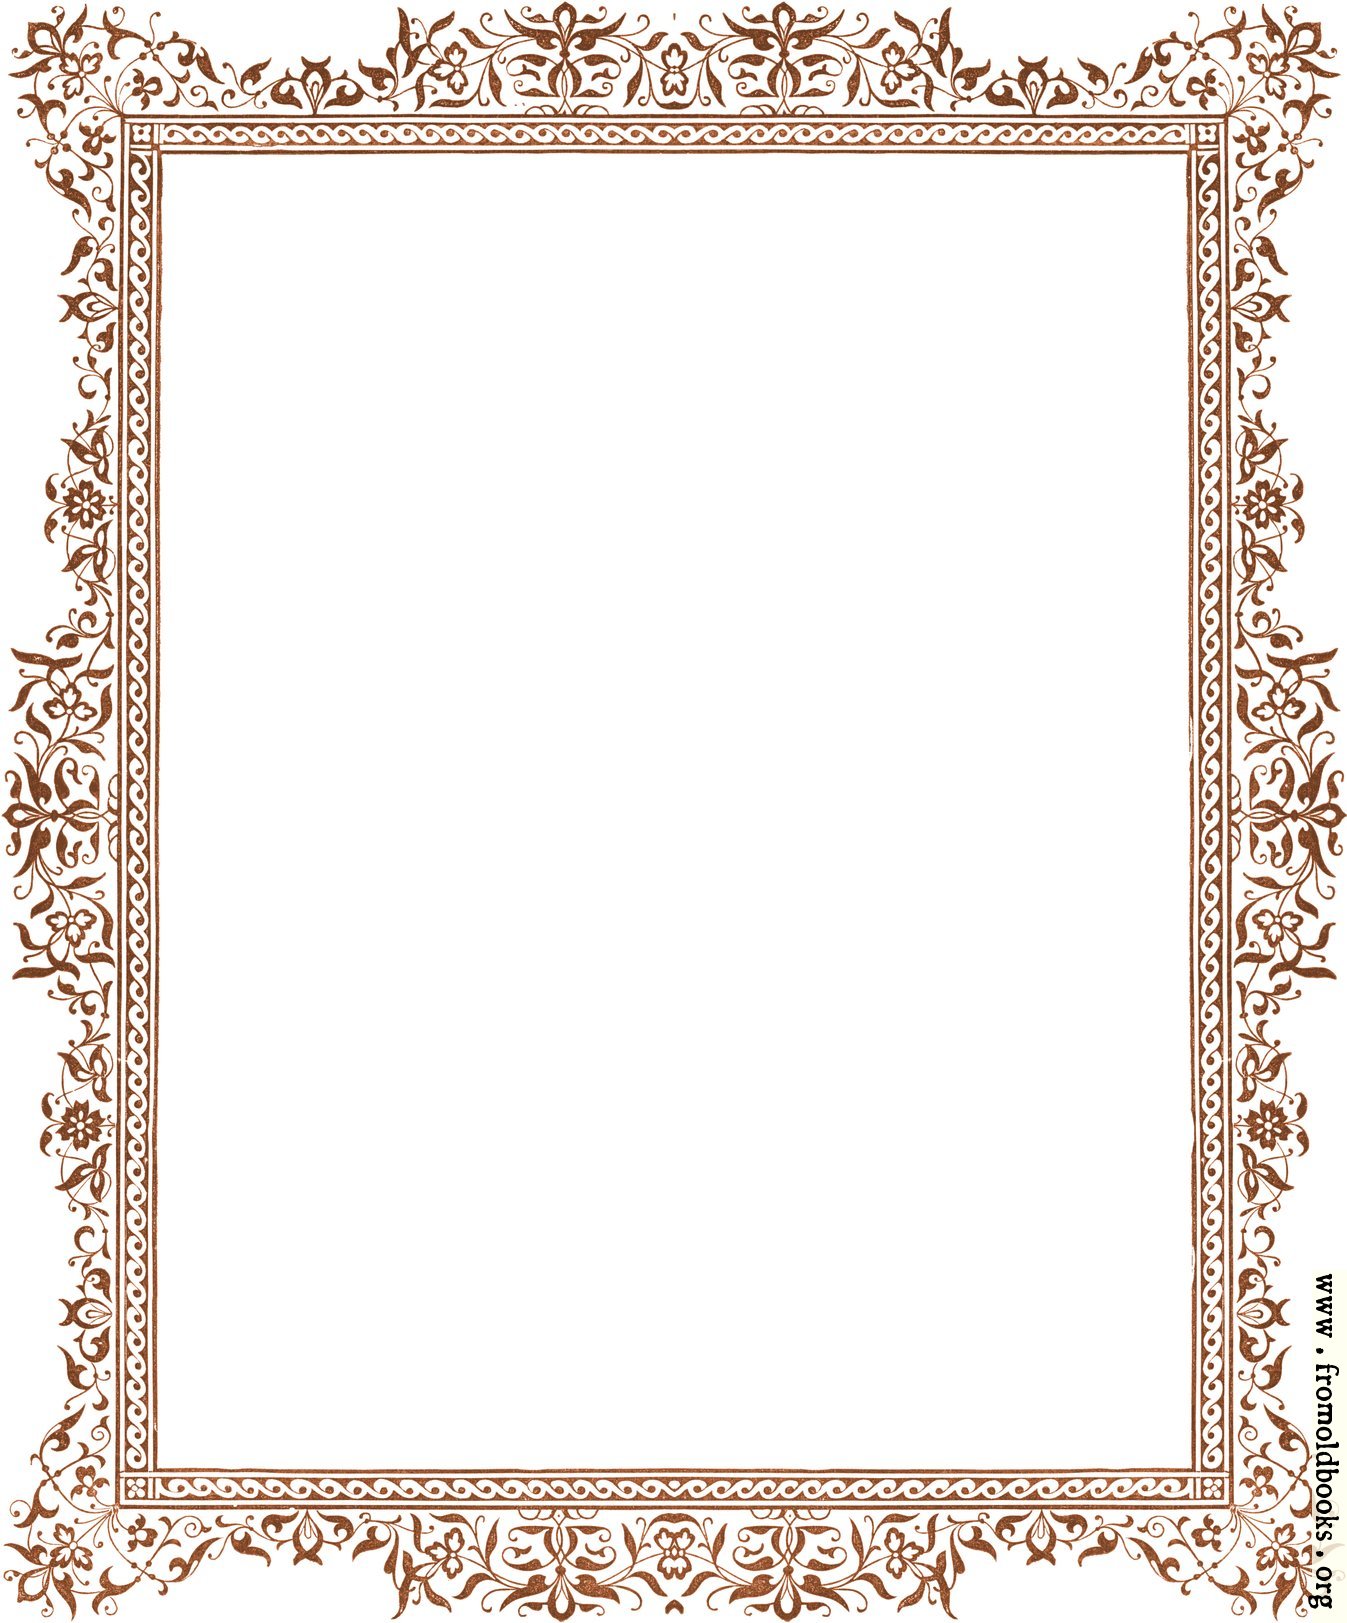 clipart picture frames borders - photo #36